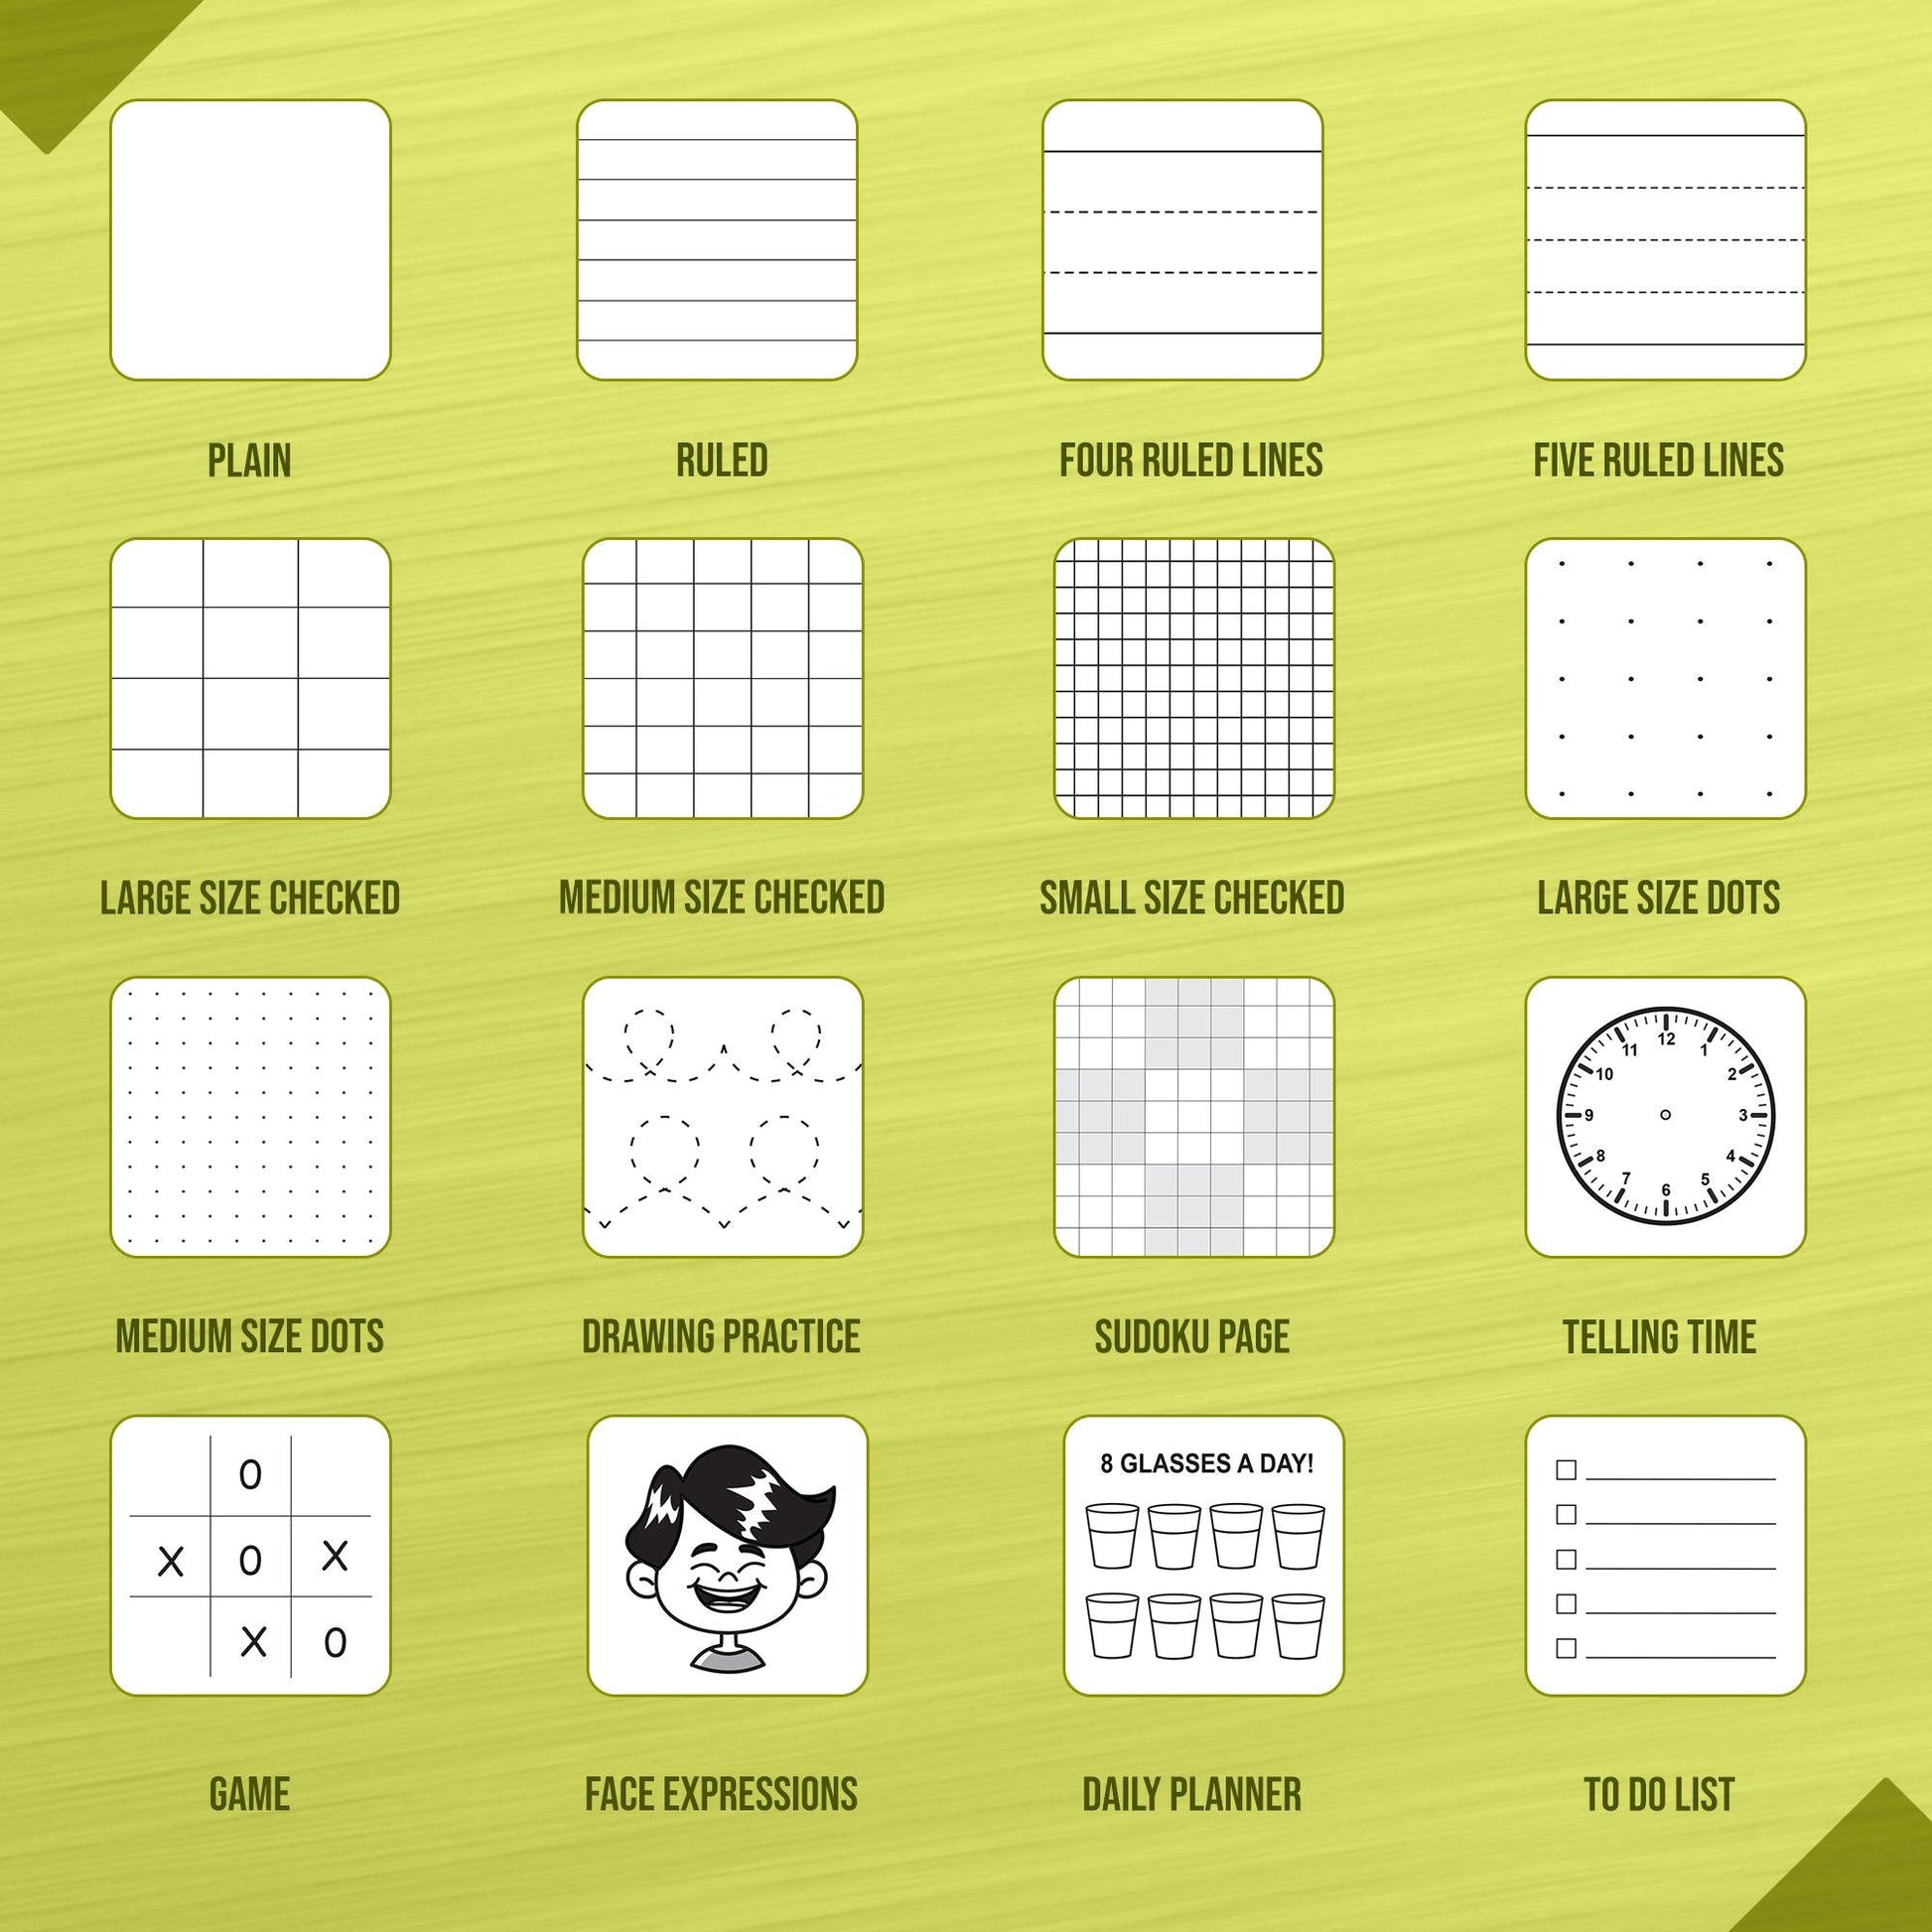 The image shows a green background which has plain paper, ruled, four ruled lines, five ruled lines, large size checked, medium size checked, small size checked, large size dots, medium size dots, drawing practice, sudoku page, telling time, game, face expressions, daily planner and to-to list pages